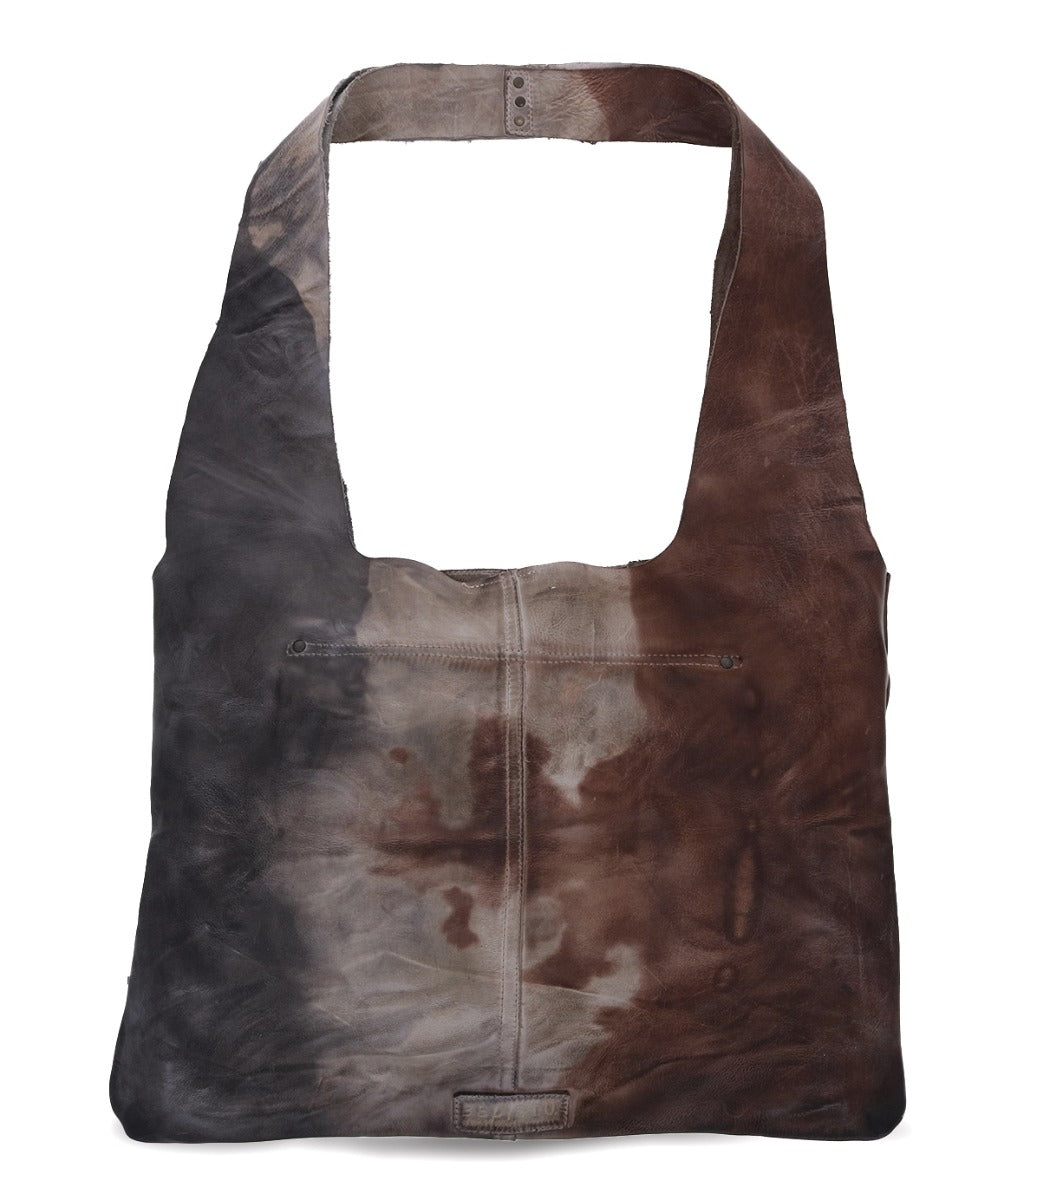 An Ariel bag in brown and black tie dye on a white background by Bed Stu.